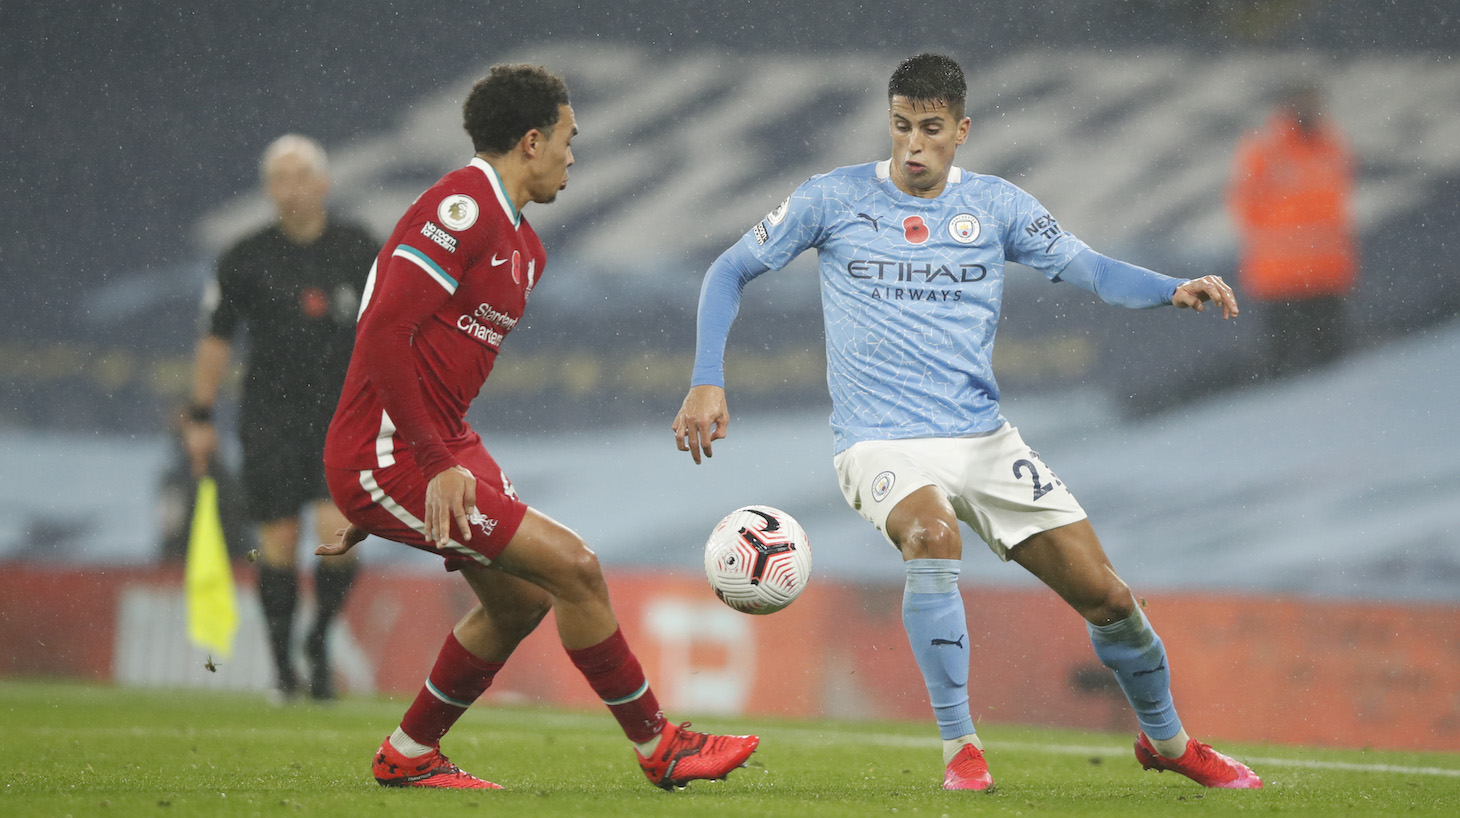 Joao Cancelo of Manchester City is challenged by Trent Alexander-Arnold of Liverpool during the Premier League match between Manchester City and Liverpool at Etihad Stadium on November 08, 2020 in Manchester, England.